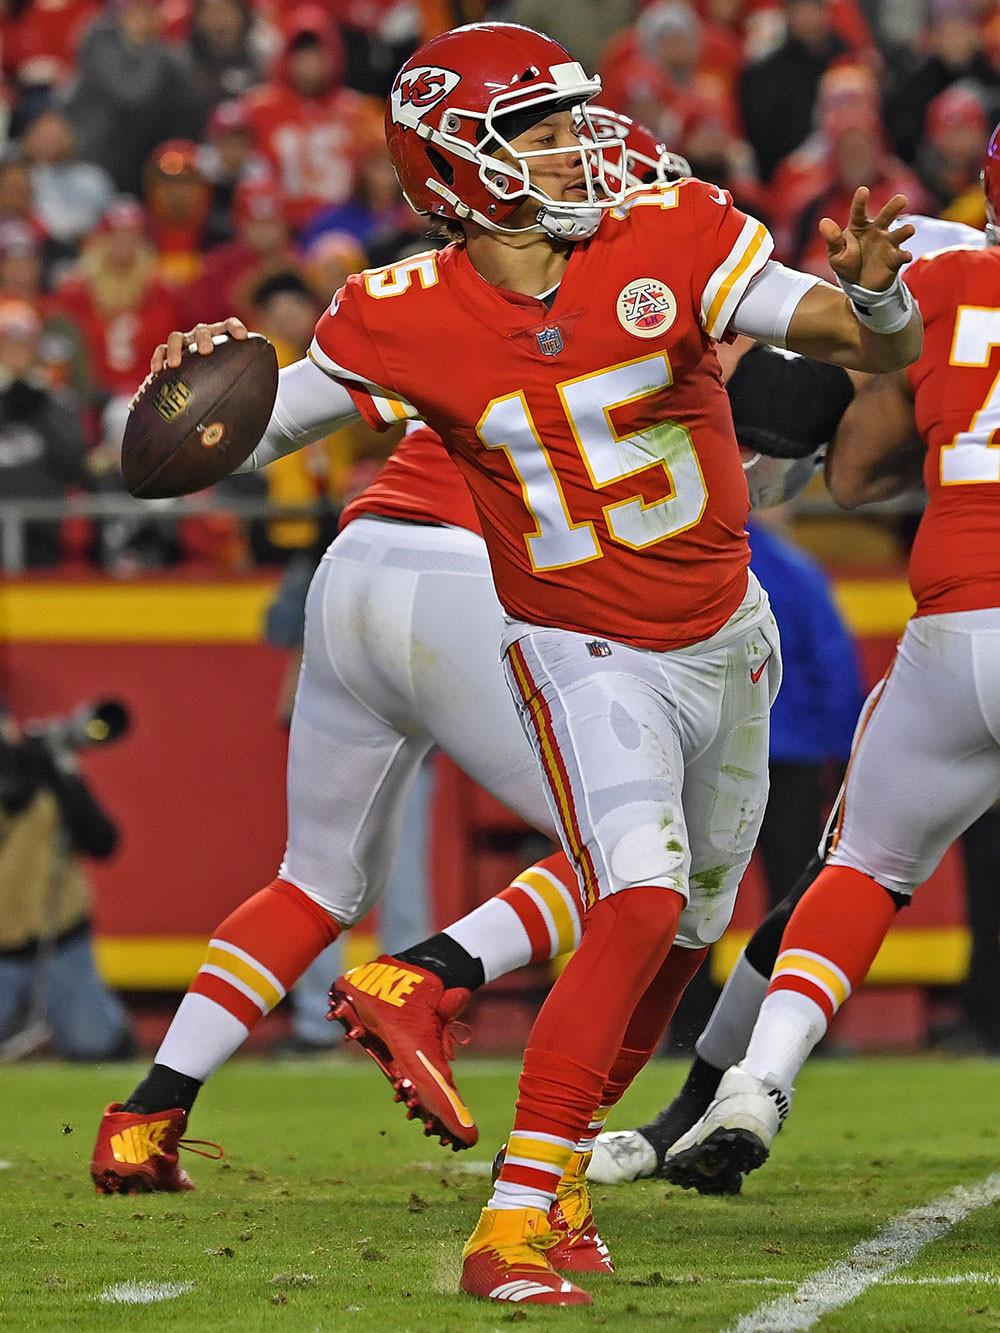 The Patrick Mahomes Show is ready for the NFL playoffs